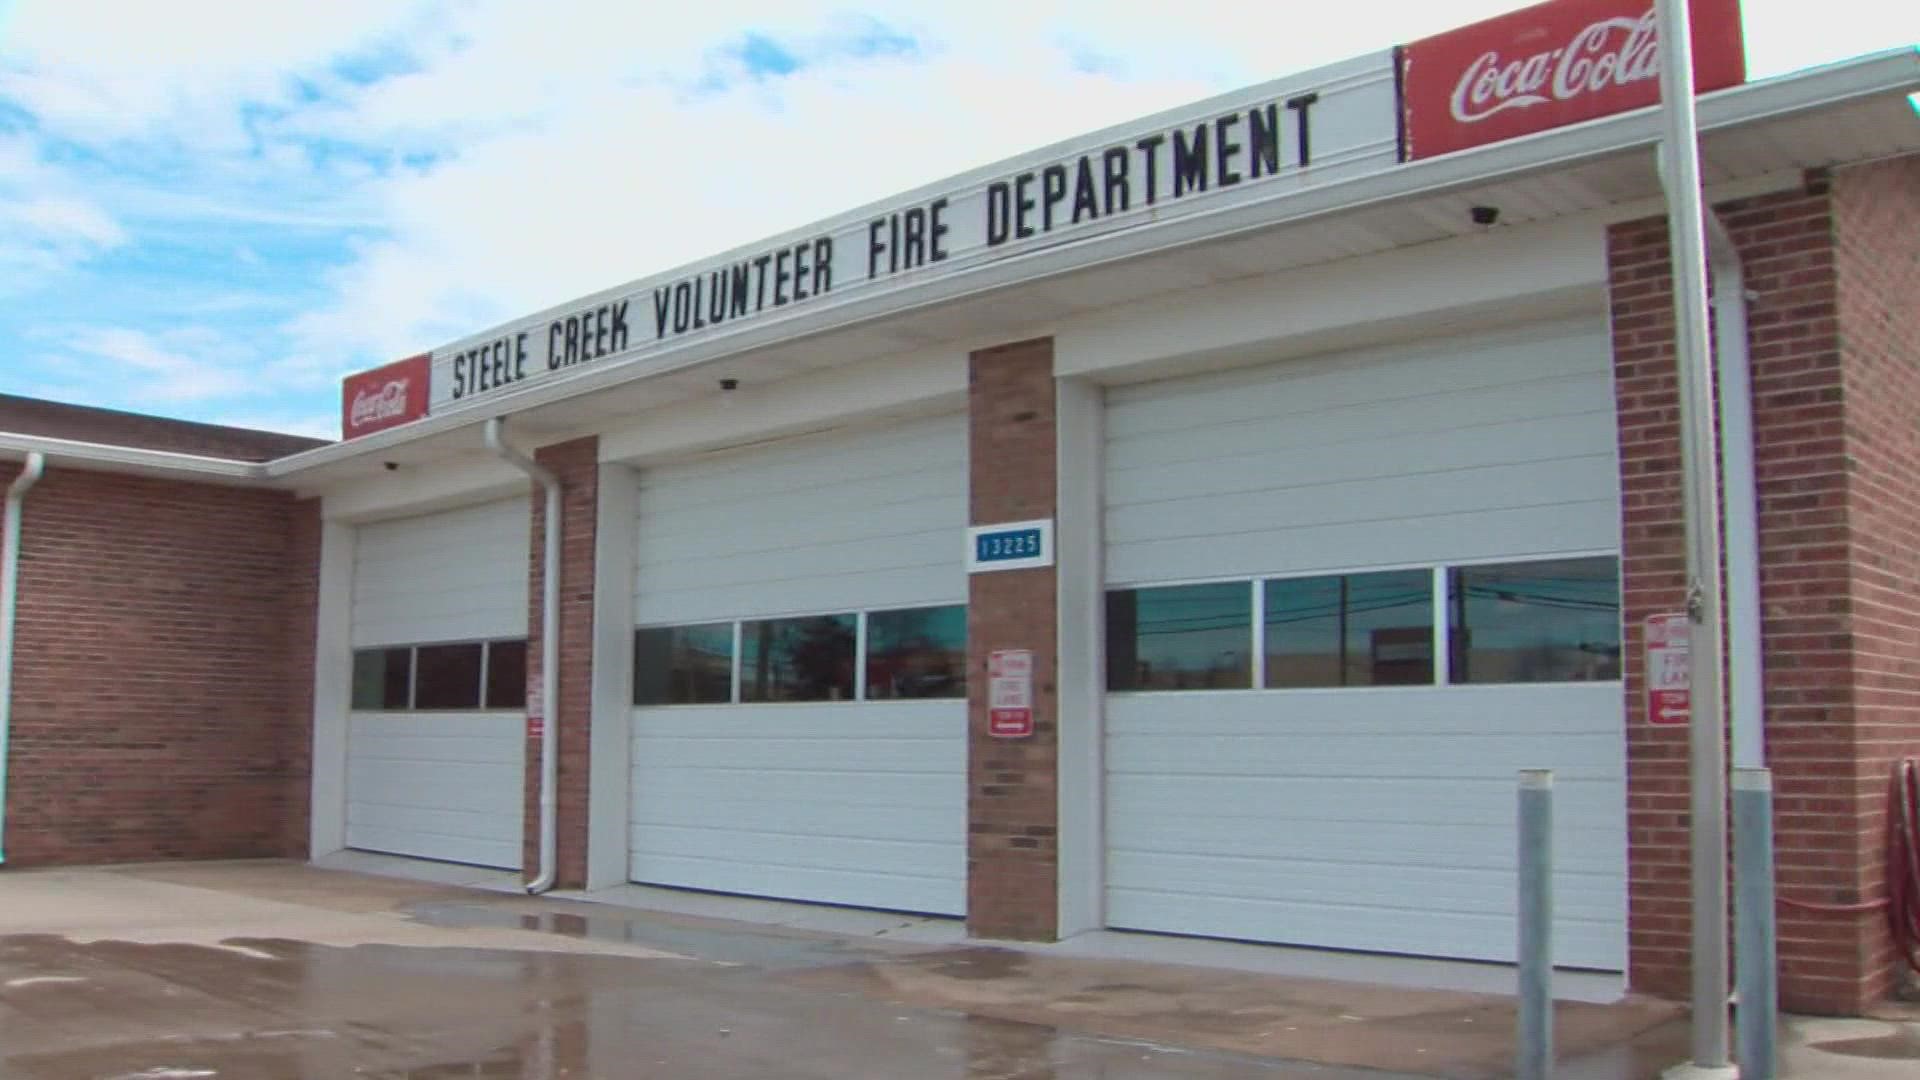 Misclassification by the city of Charlotte two decades ago is the only reason the Steele Creek Volunteer Fire Department can build on his street.